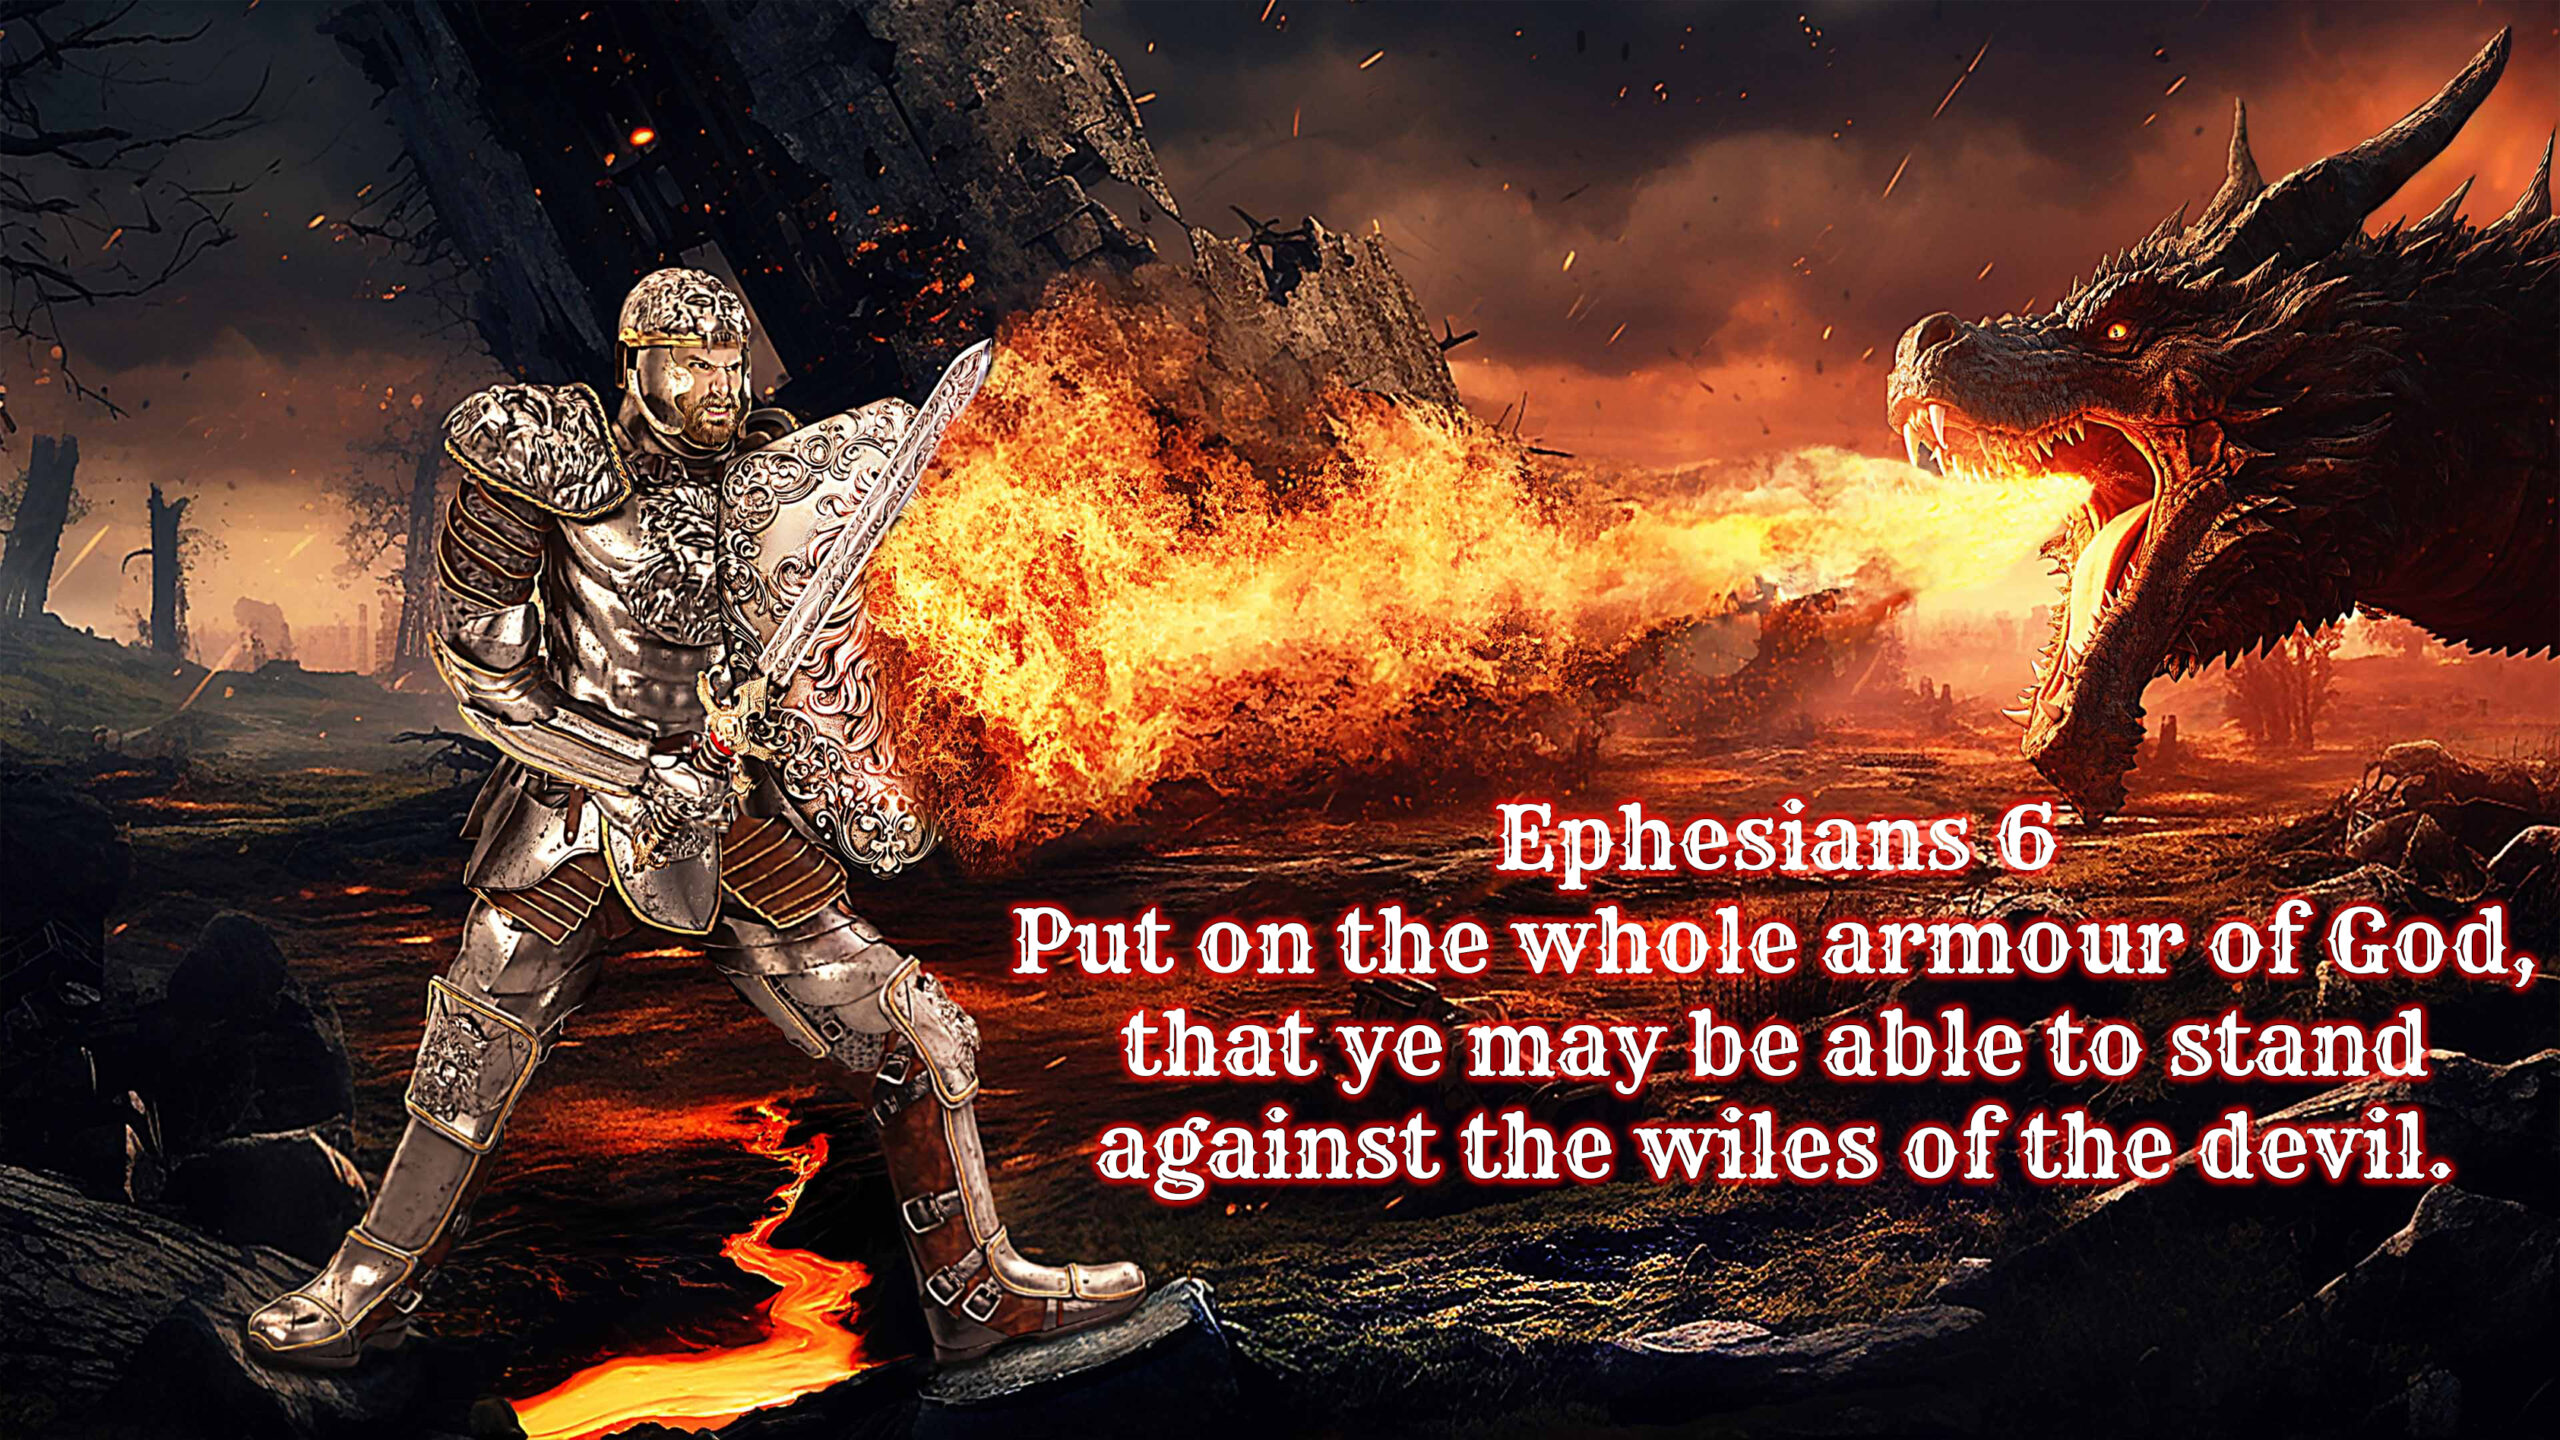 The Armour Of God knight fights fire breathing dragon shield of faith sword of the spirit battle spiritual warfare